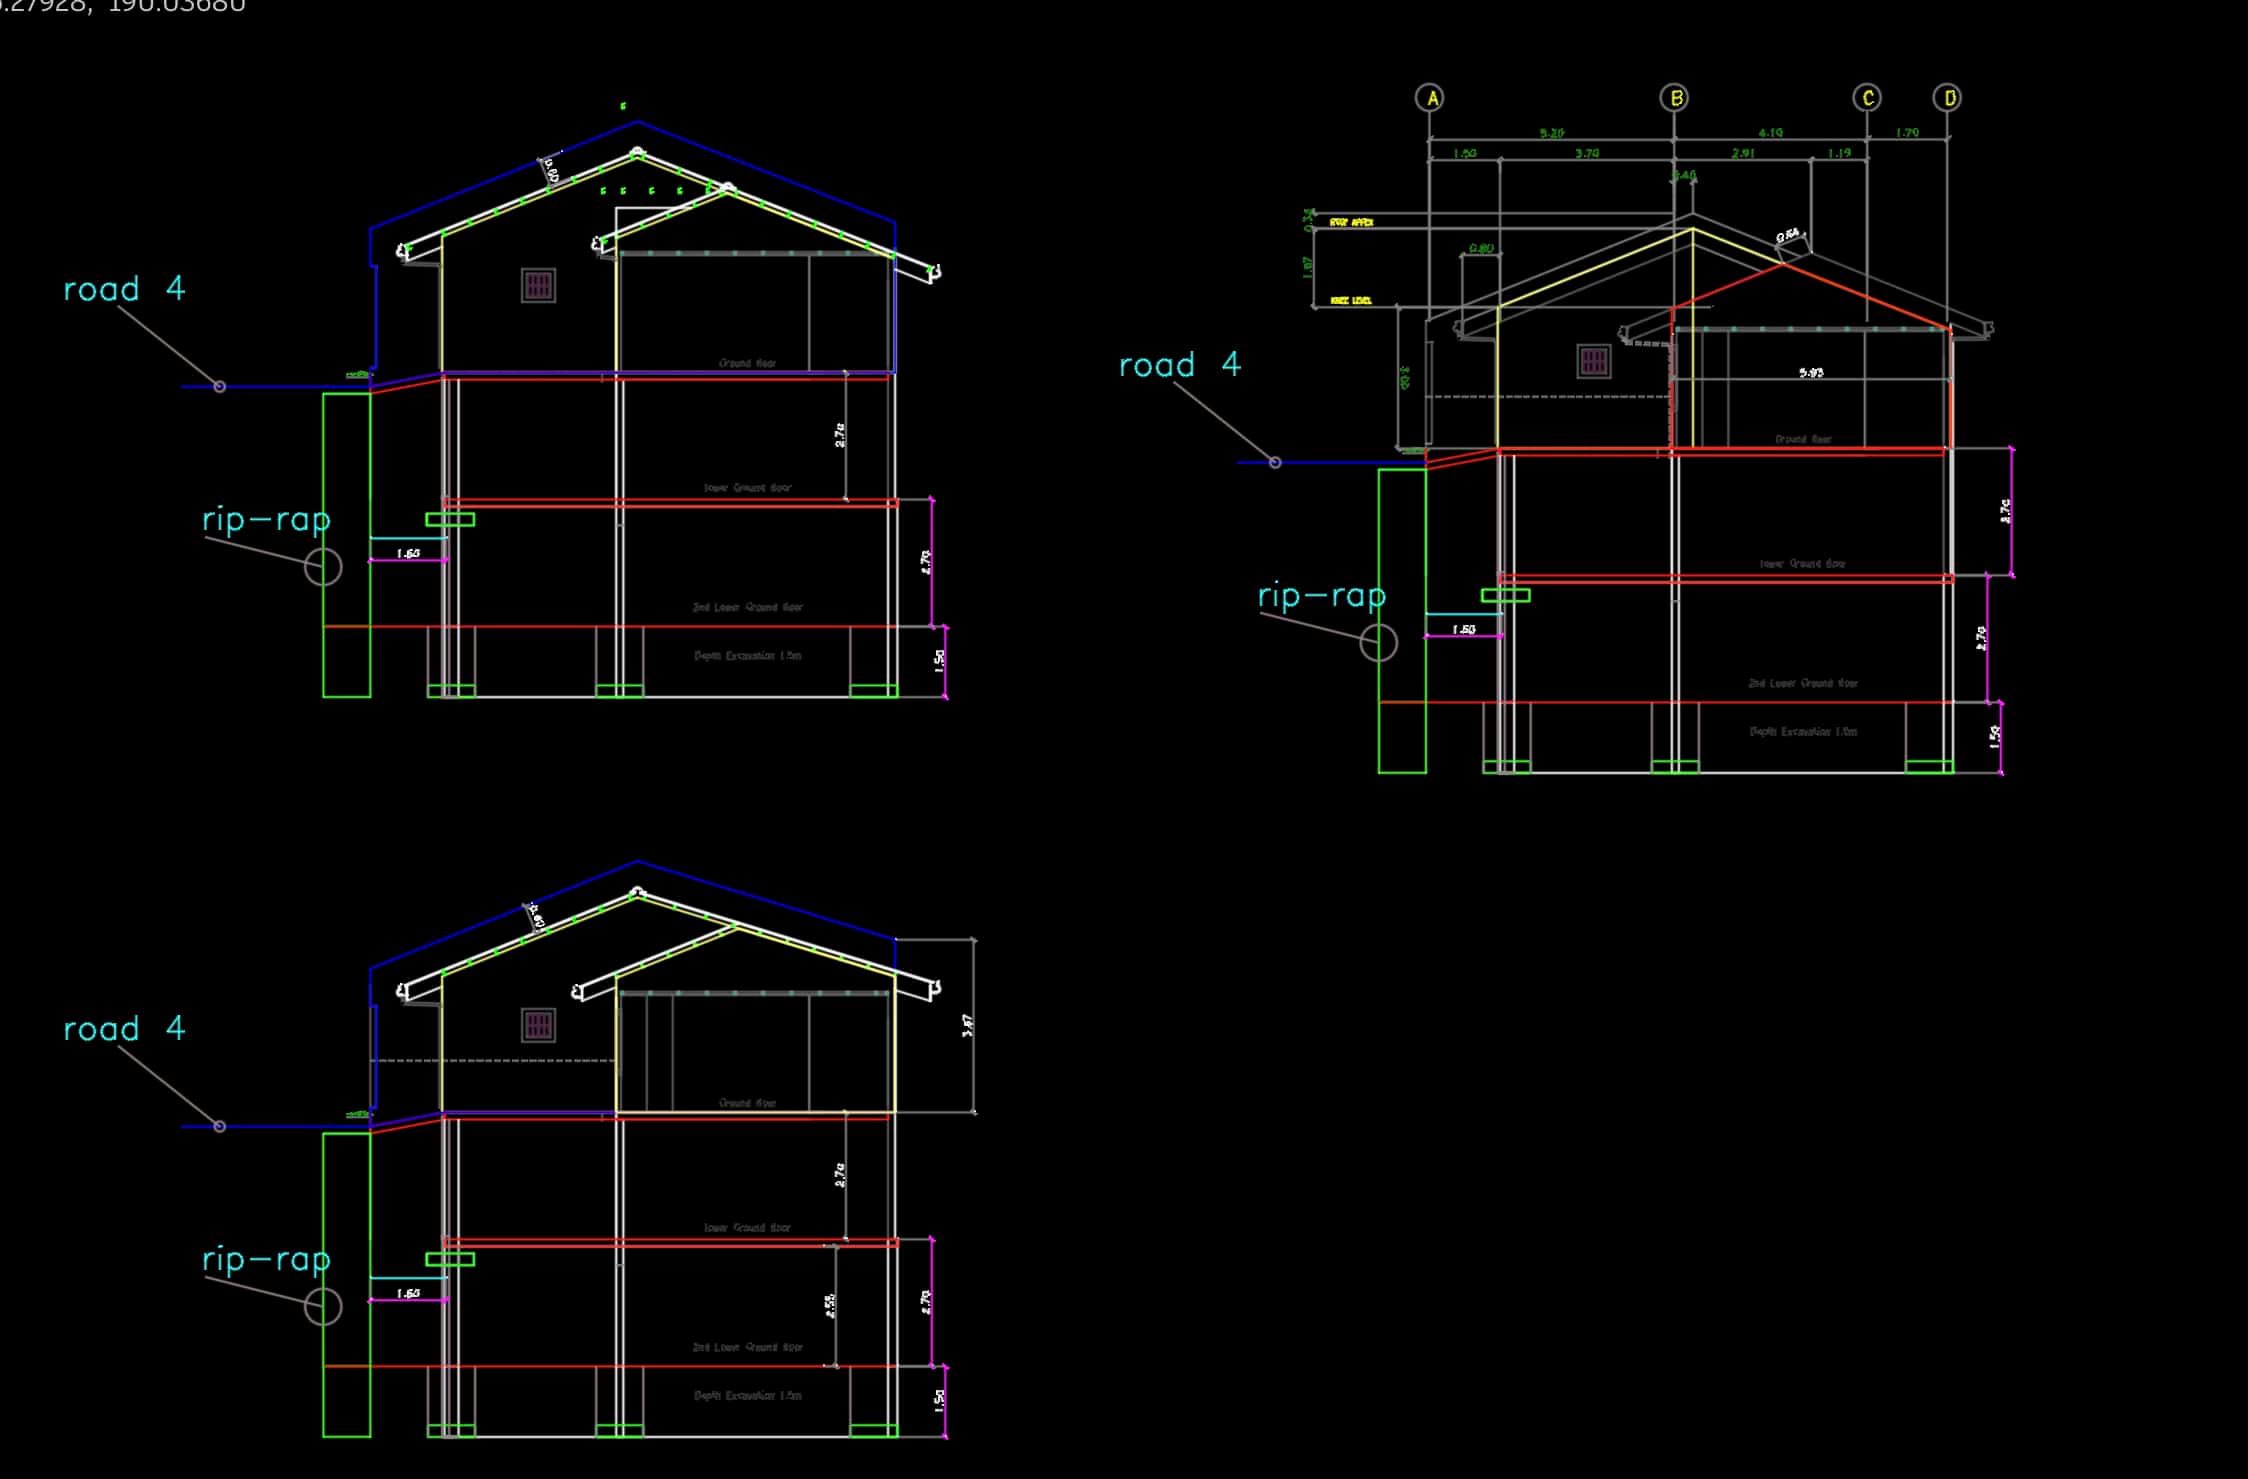 Simple Village House Plans with Auto CAD Drawings - First Floor Plan - House  Plans and Designs